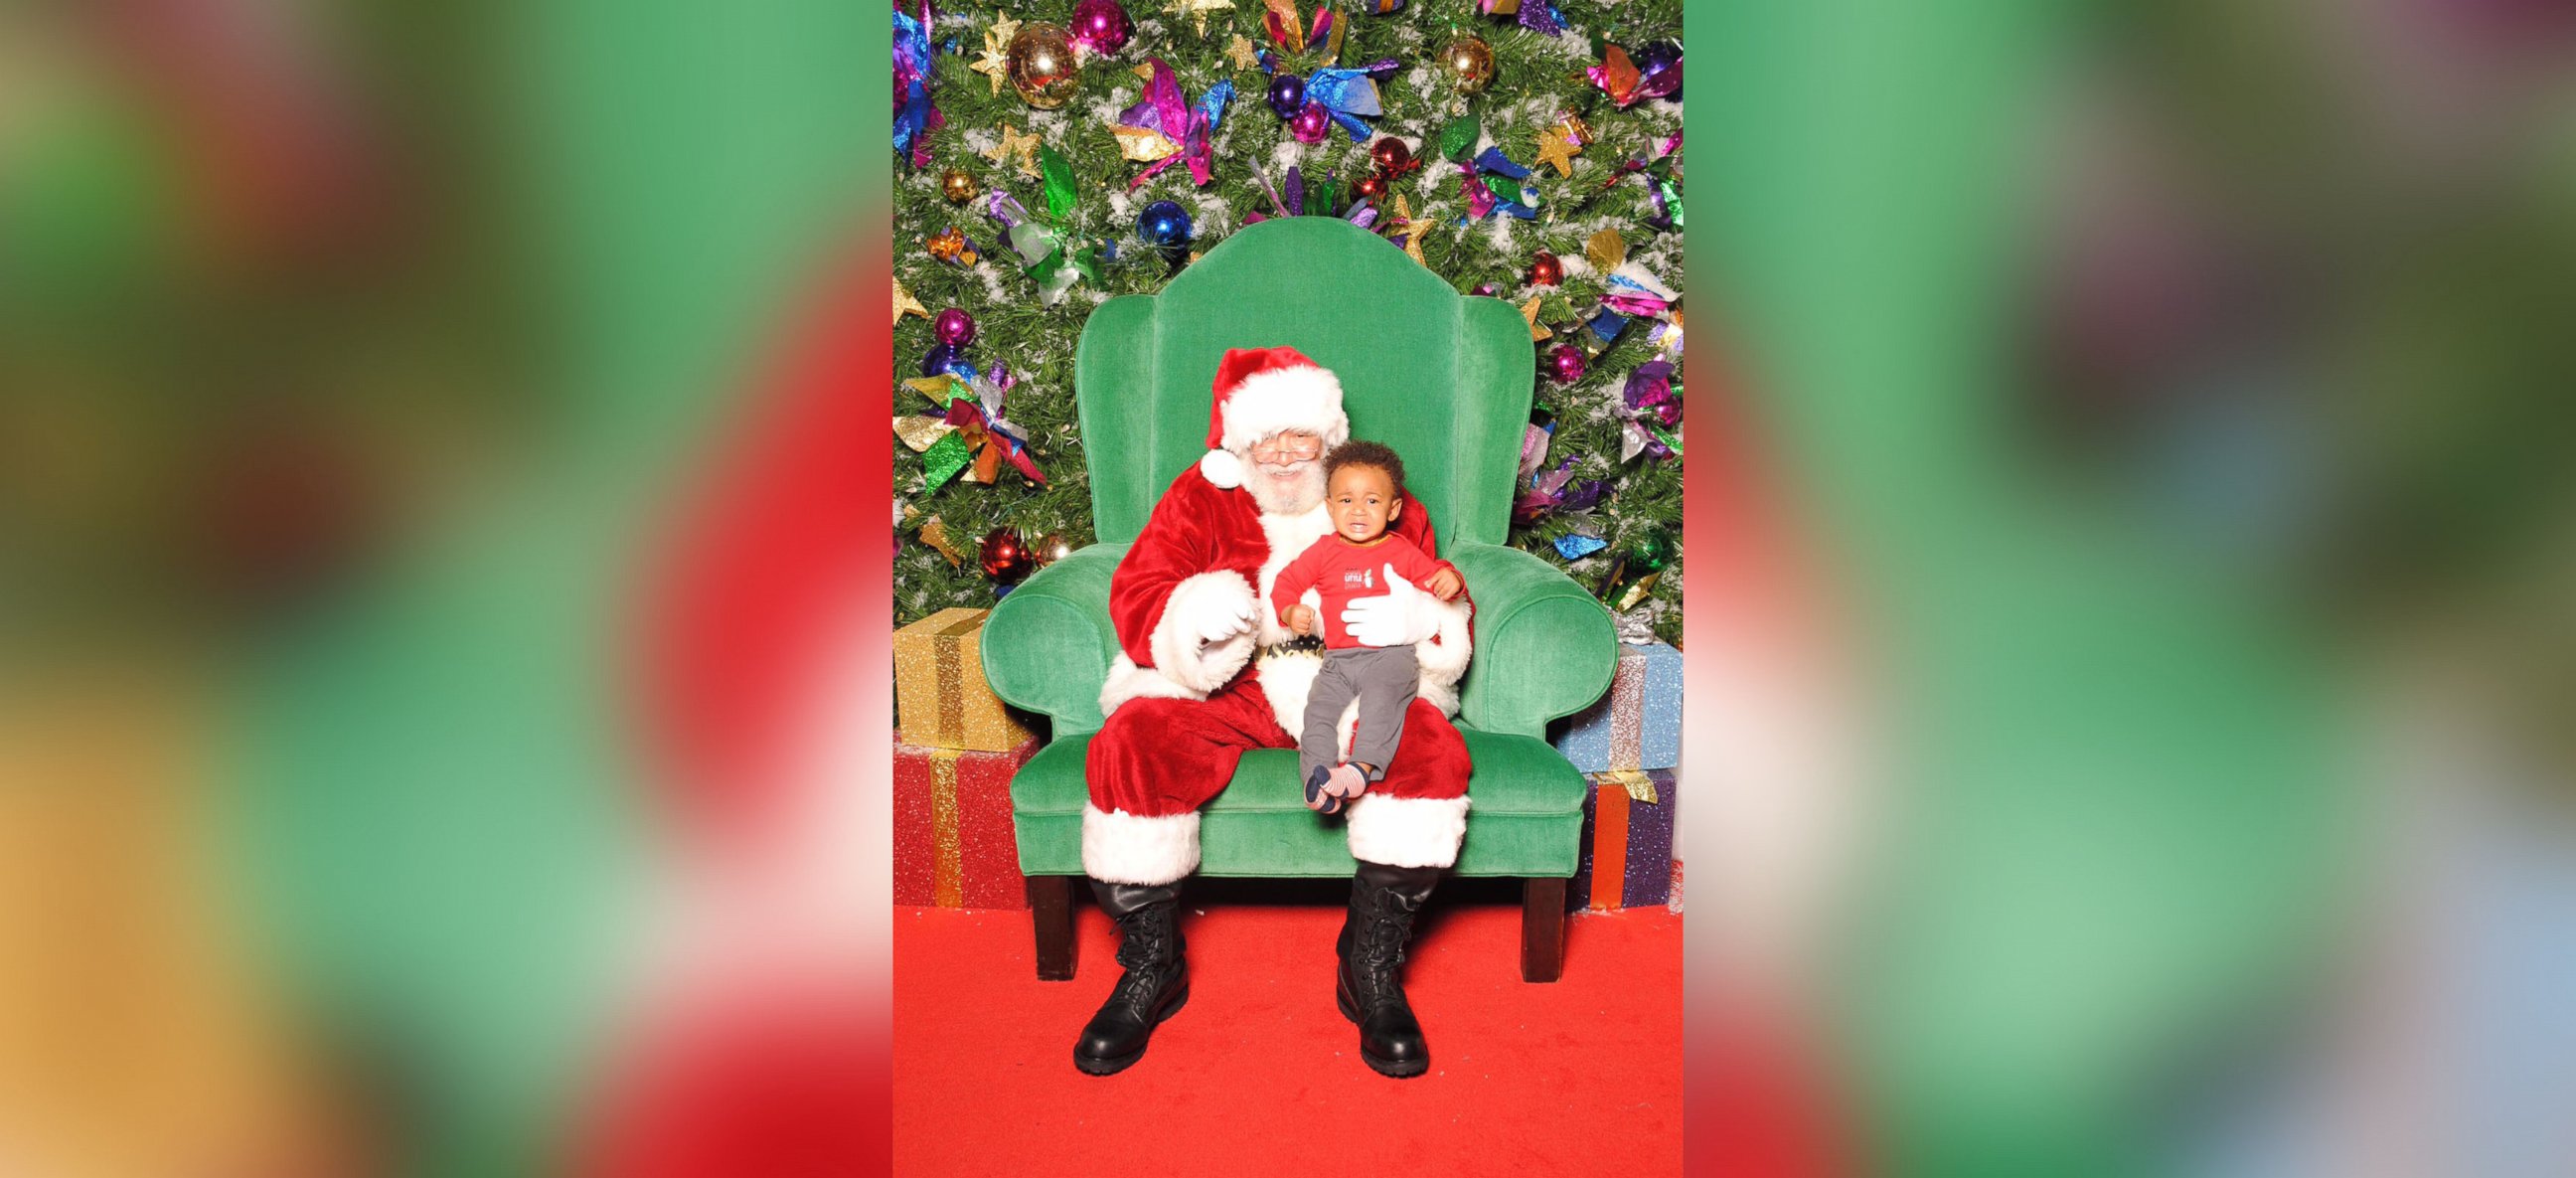 PHOTO: One-year-old Ryder Hill, from Washington, D.C., meets Santa Claus.
